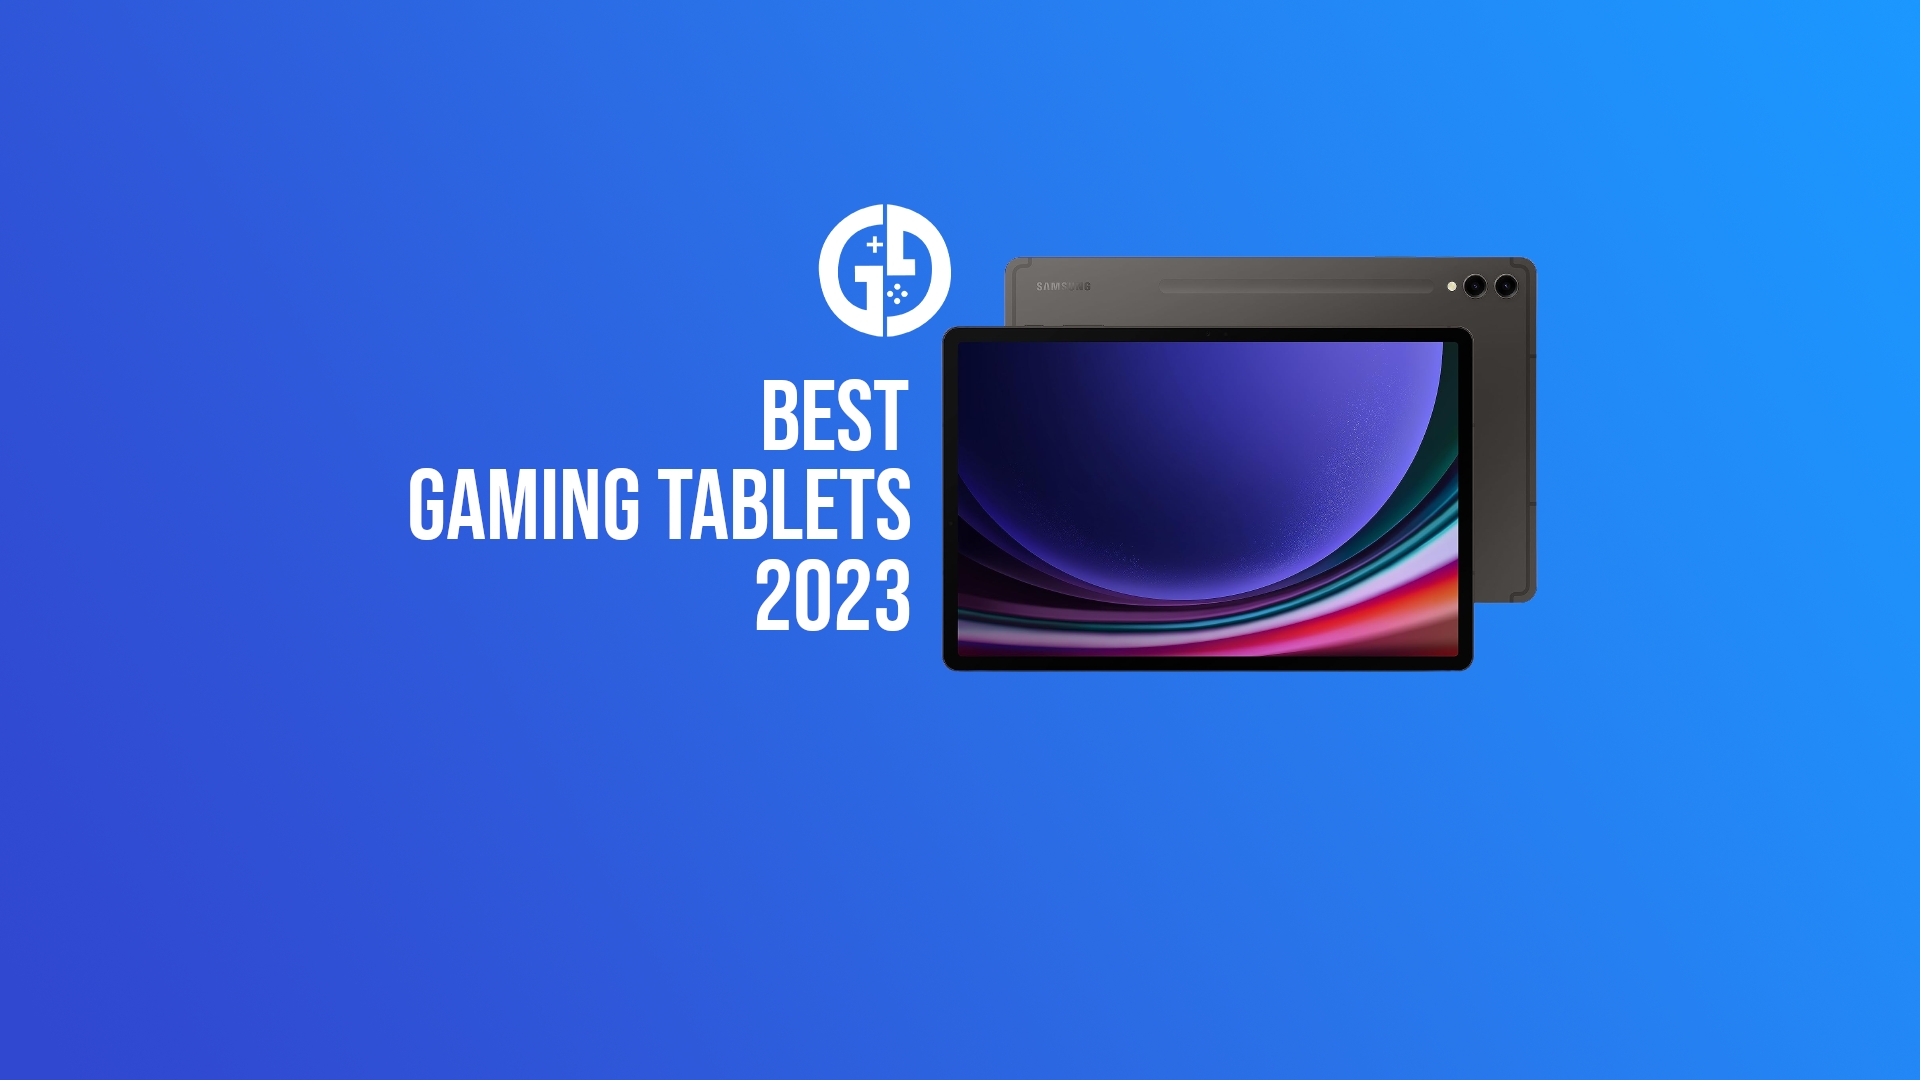 The Best Gaming Tablets for 2023